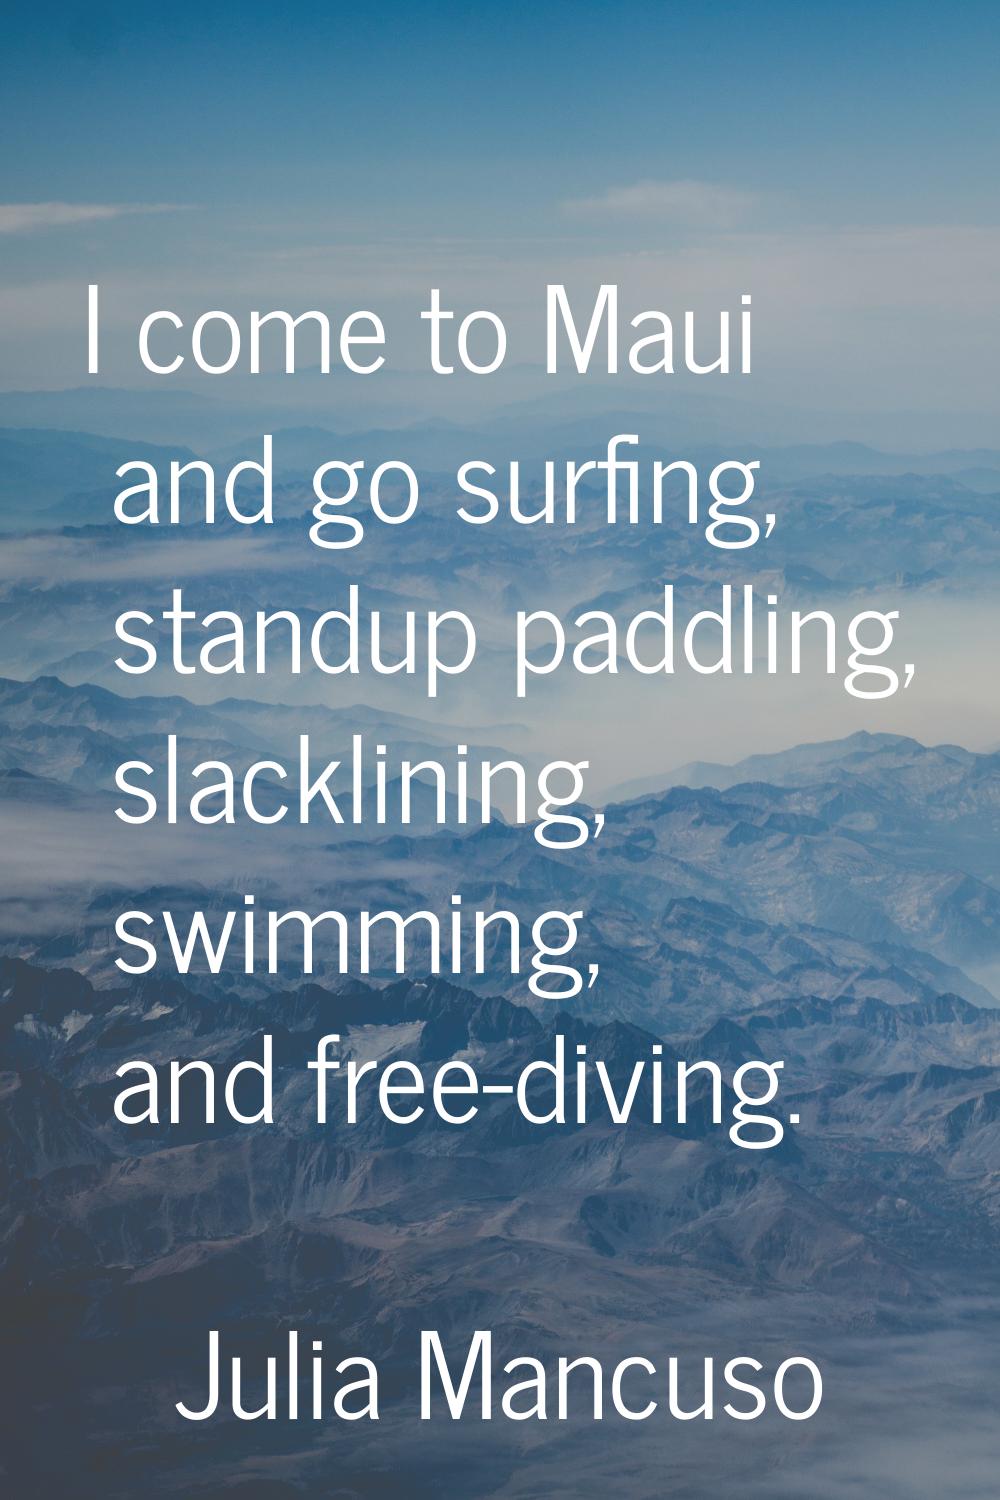 I come to Maui and go surfing, standup paddling, slacklining, swimming, and free-diving.